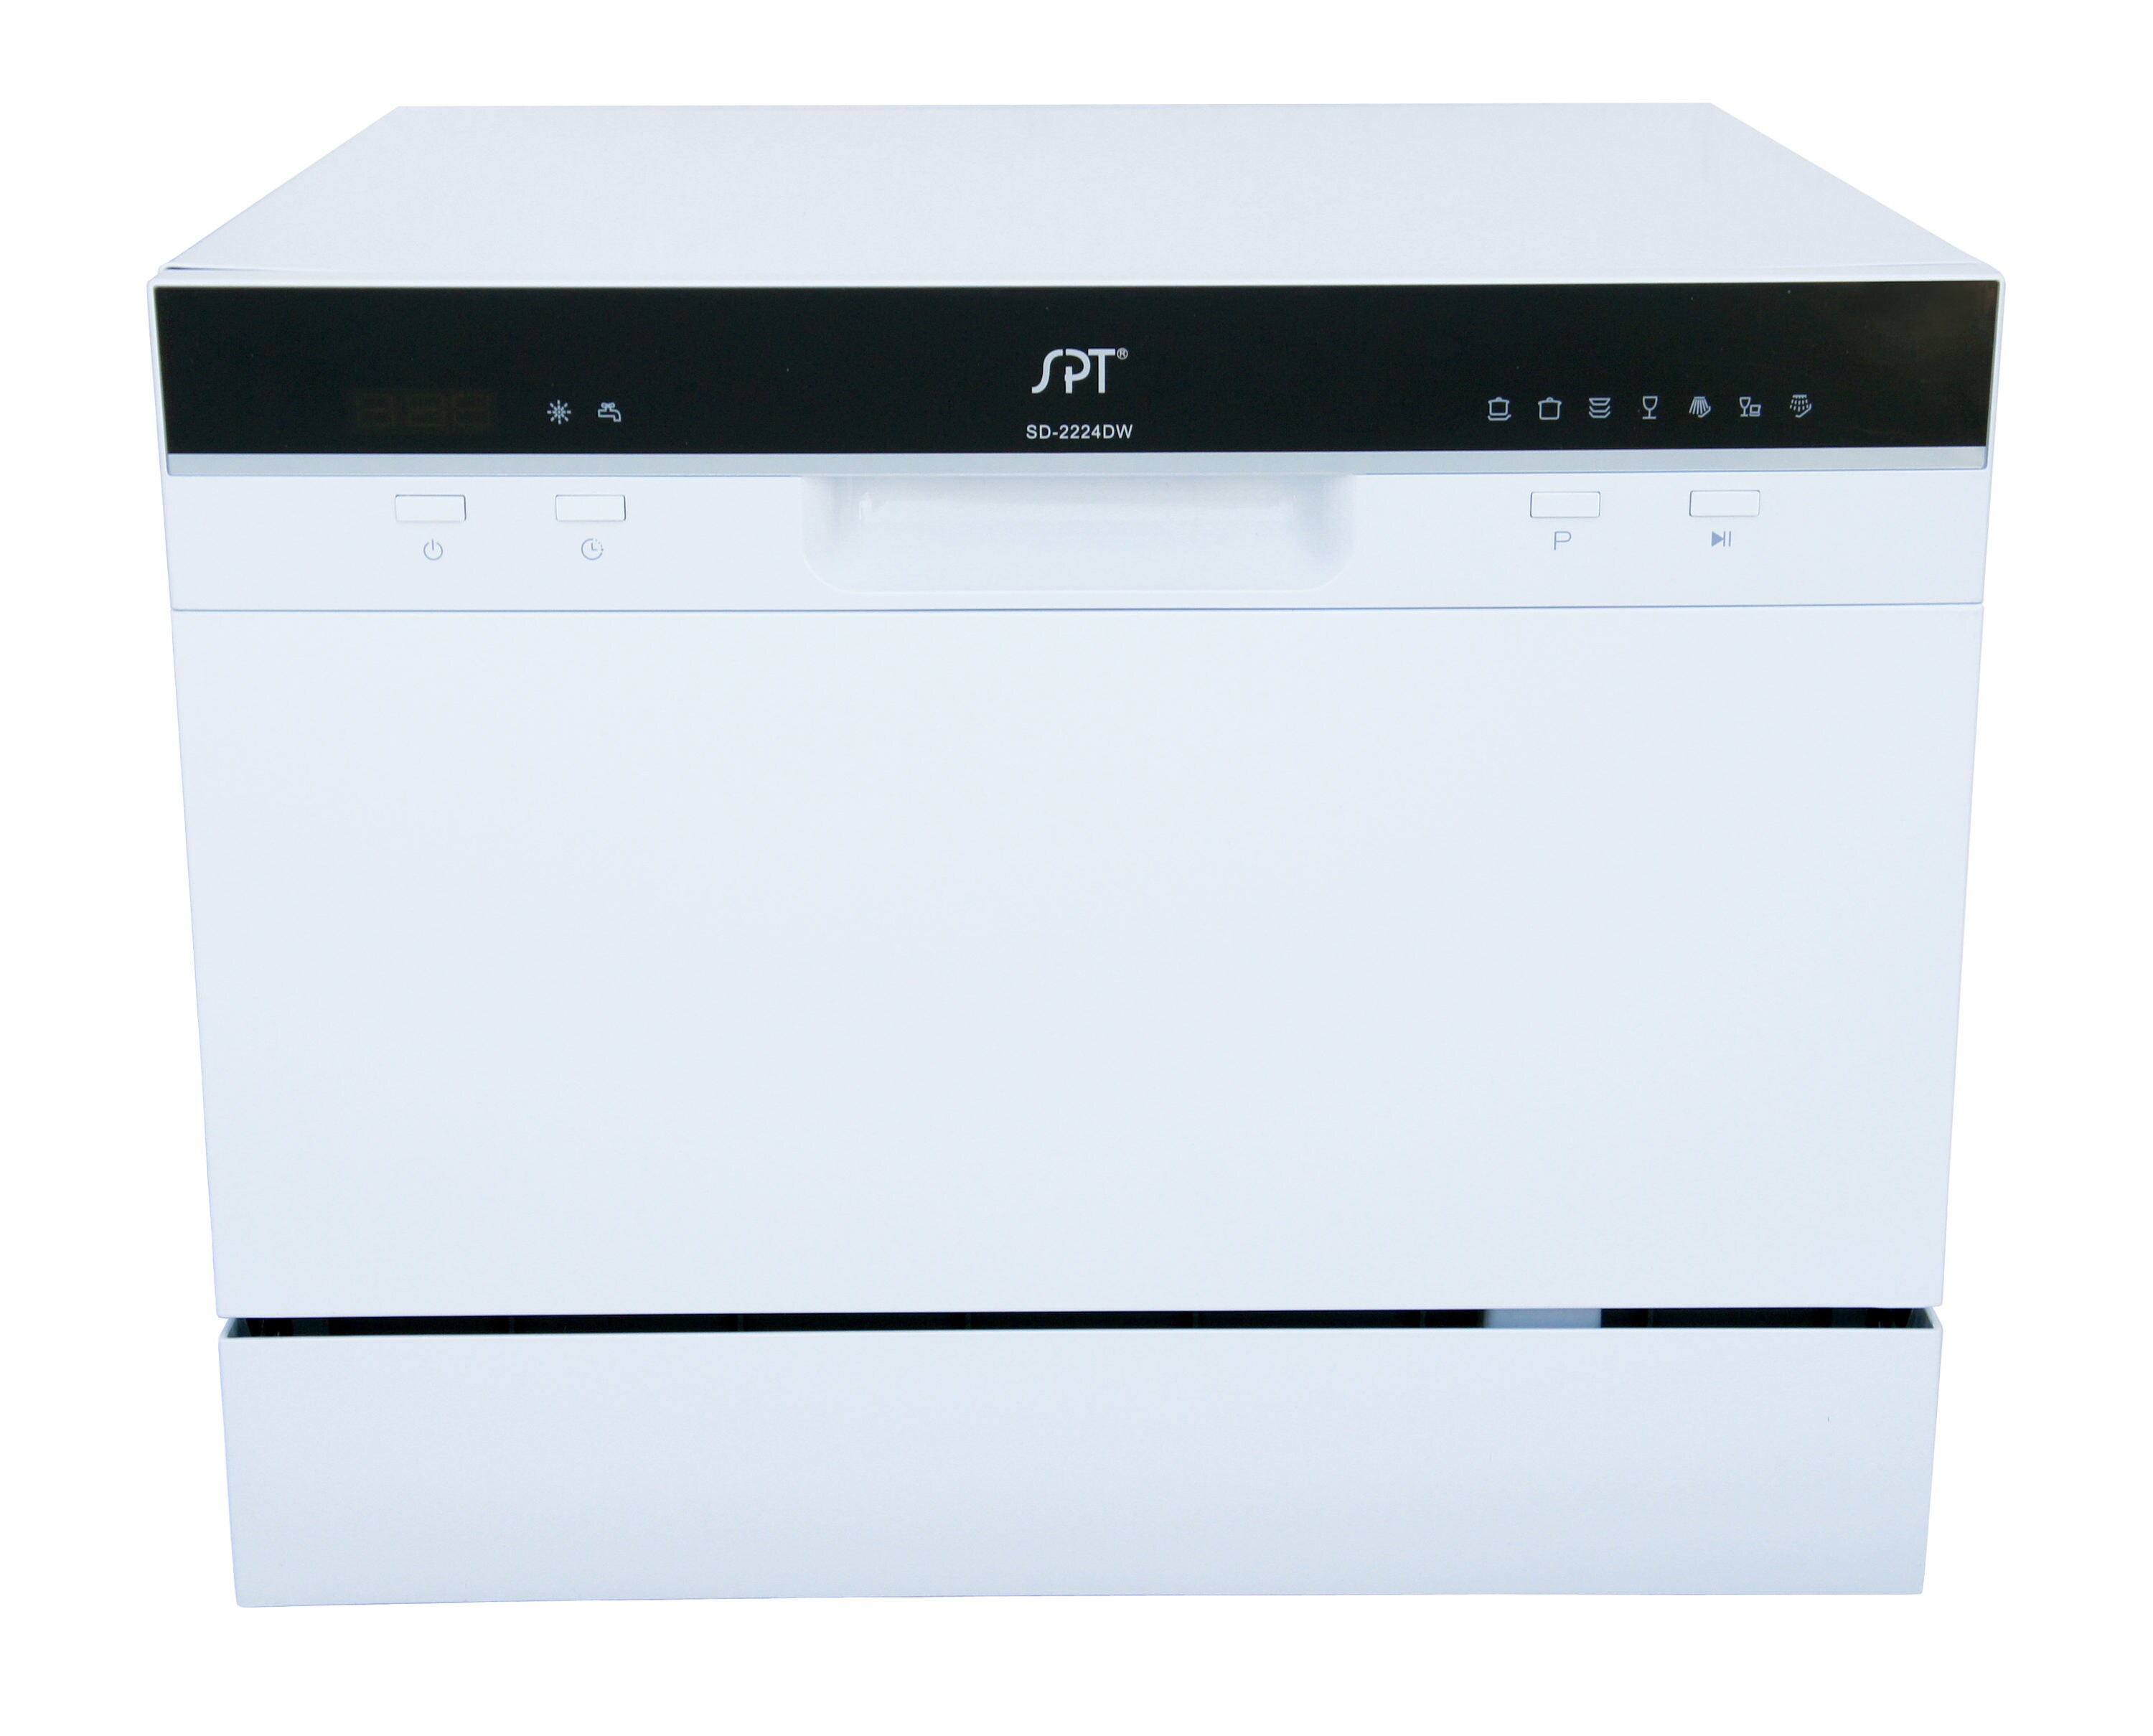 SPT 6 Setting Countertop Dishwasher in the Portable Dishwashers ...